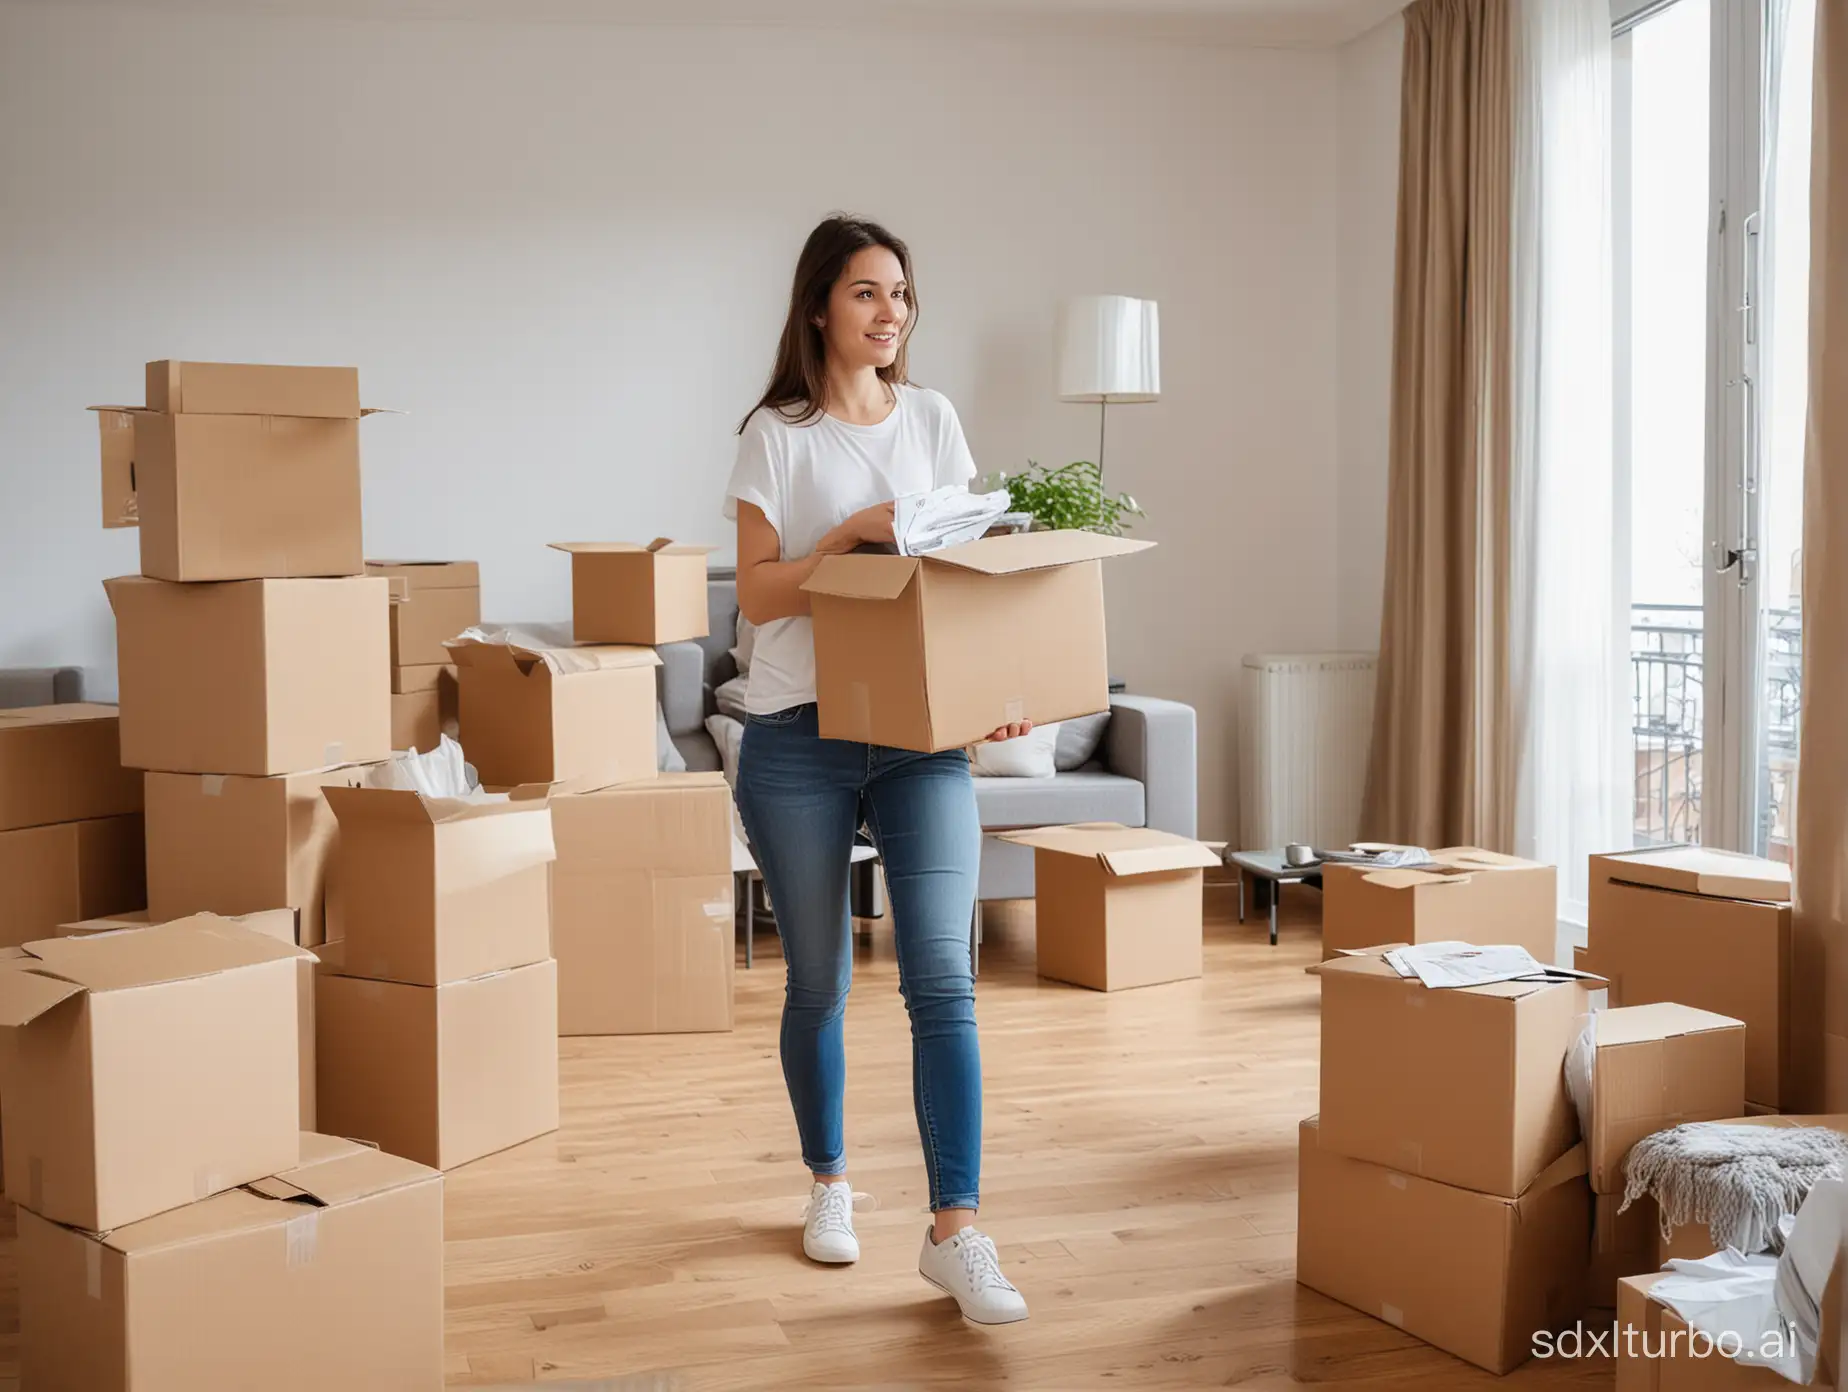 a young woman moving into her appartement, boxes around her, furniture not yet arranged